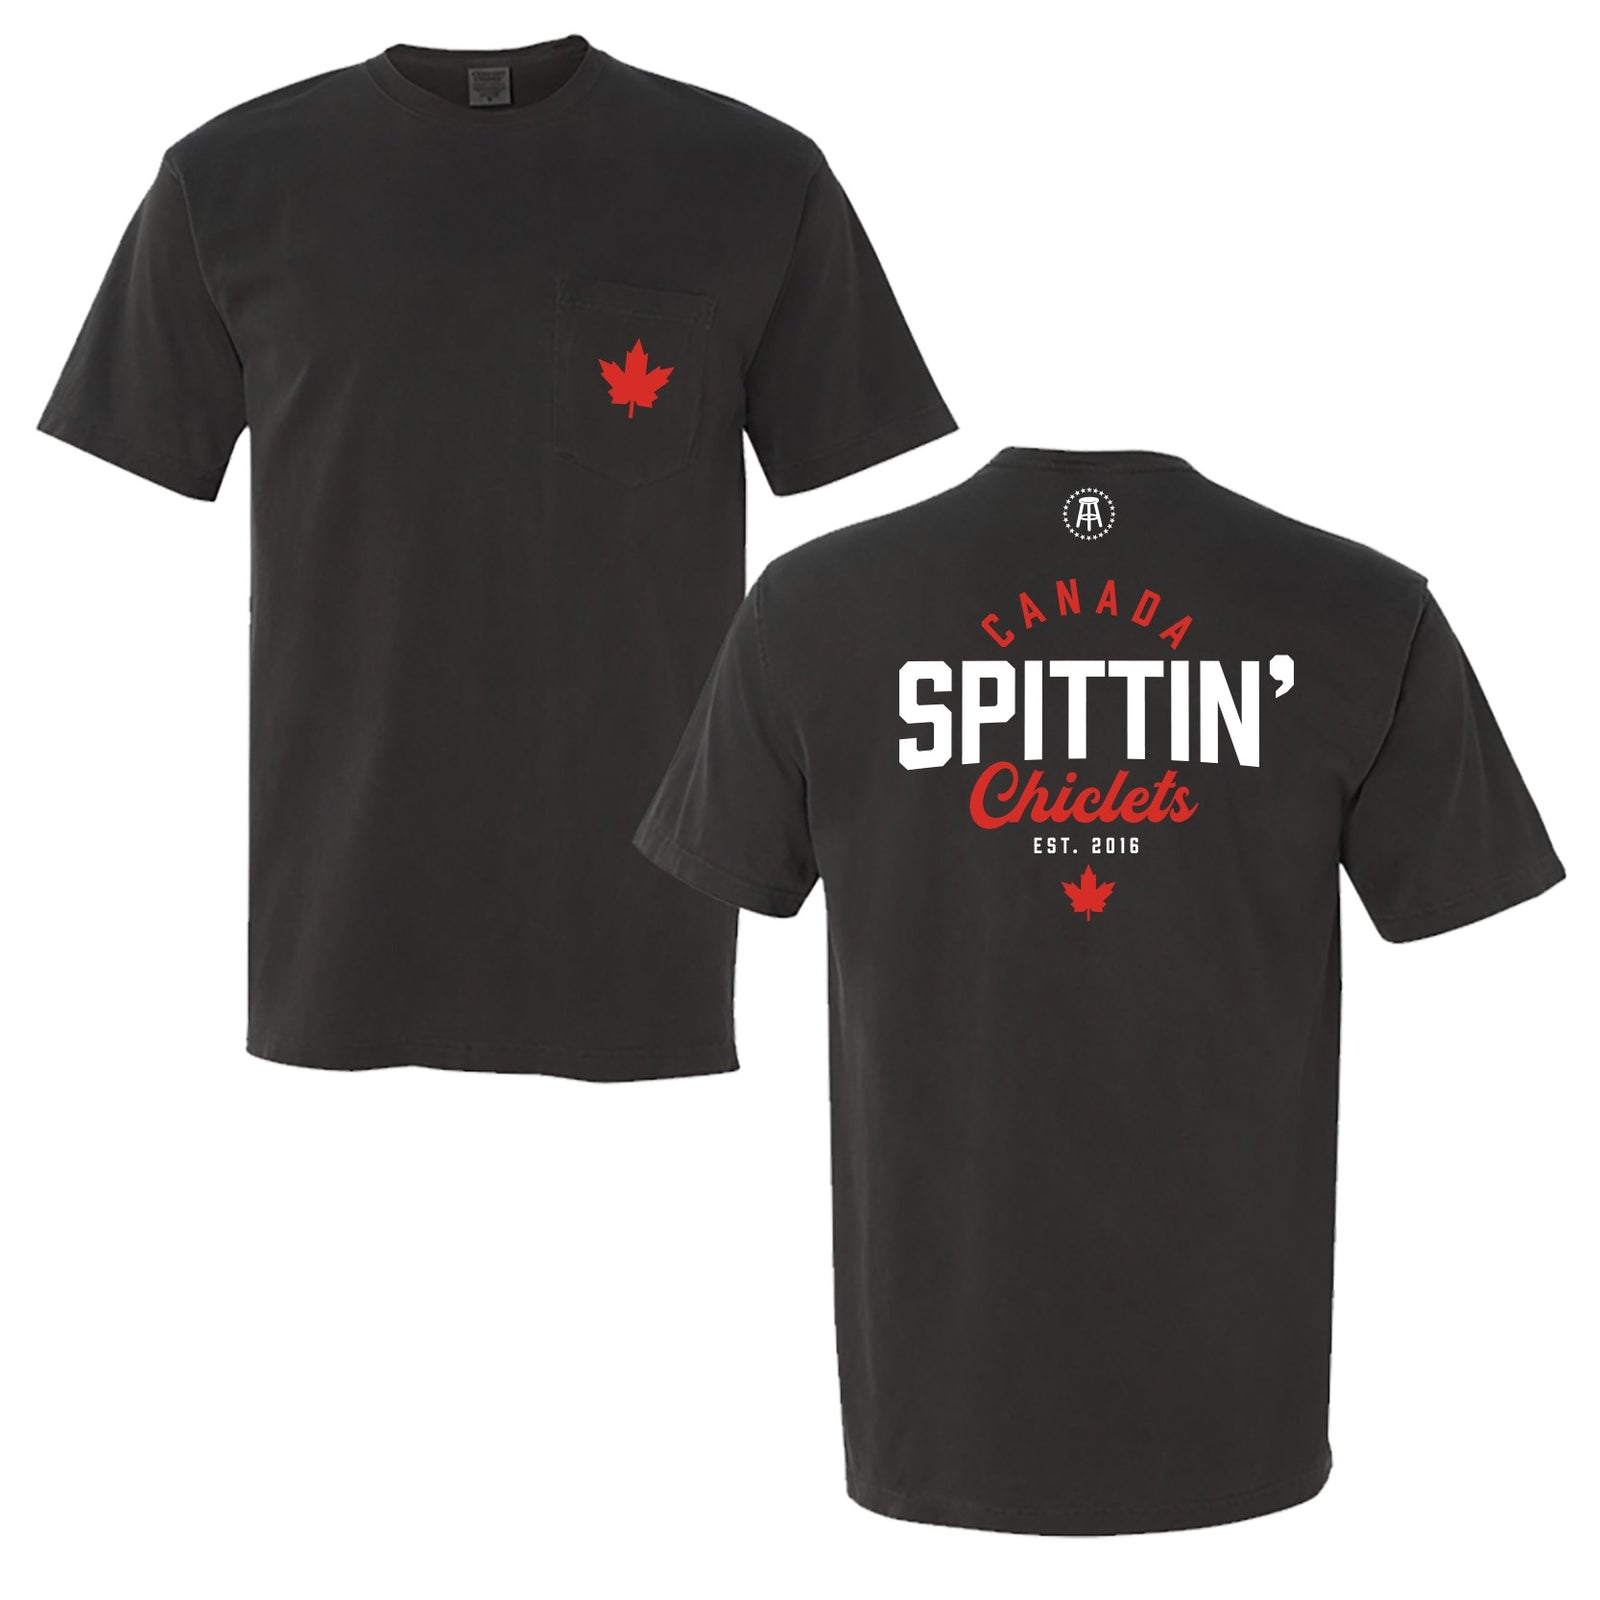 Spittin' Chiclets CAN Pocket Tee